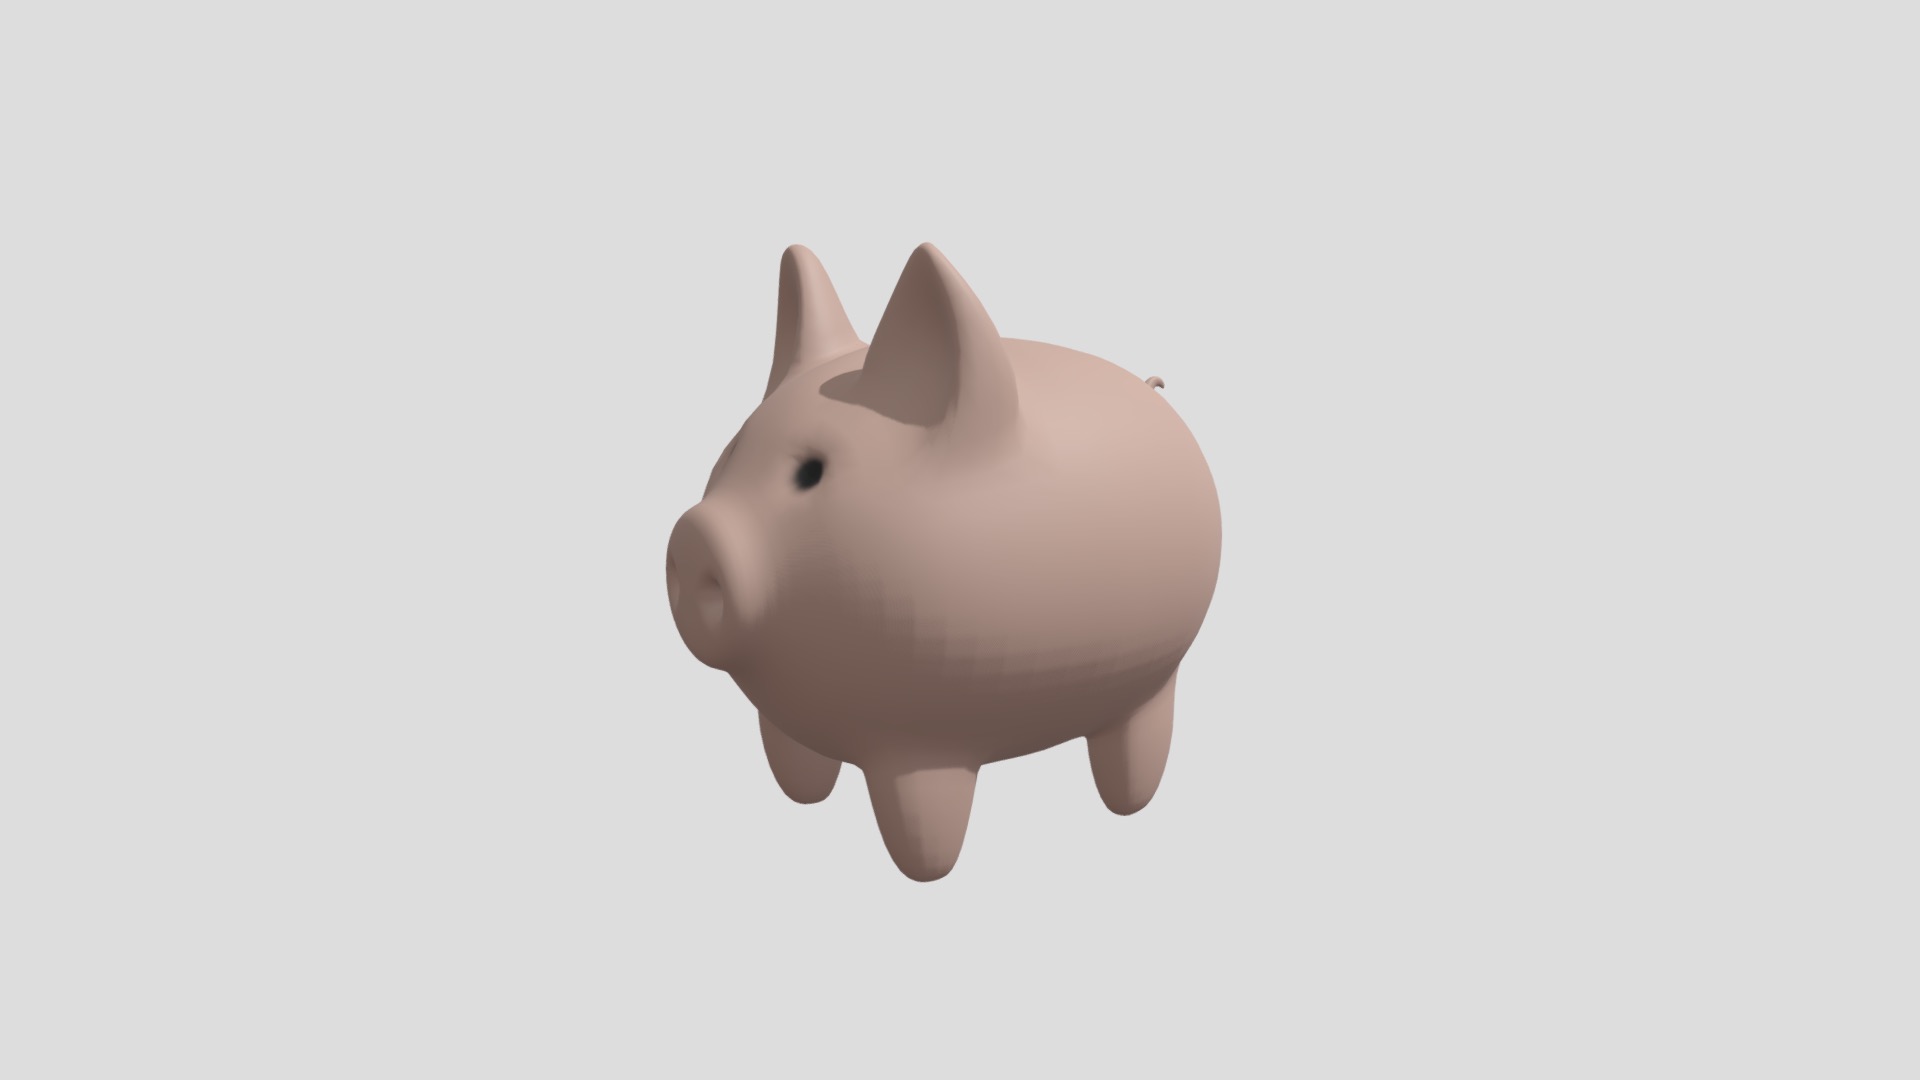 3D model Piggy Bank - This is a 3D model of the Piggy Bank. The 3D model is about a pink piggy bank.